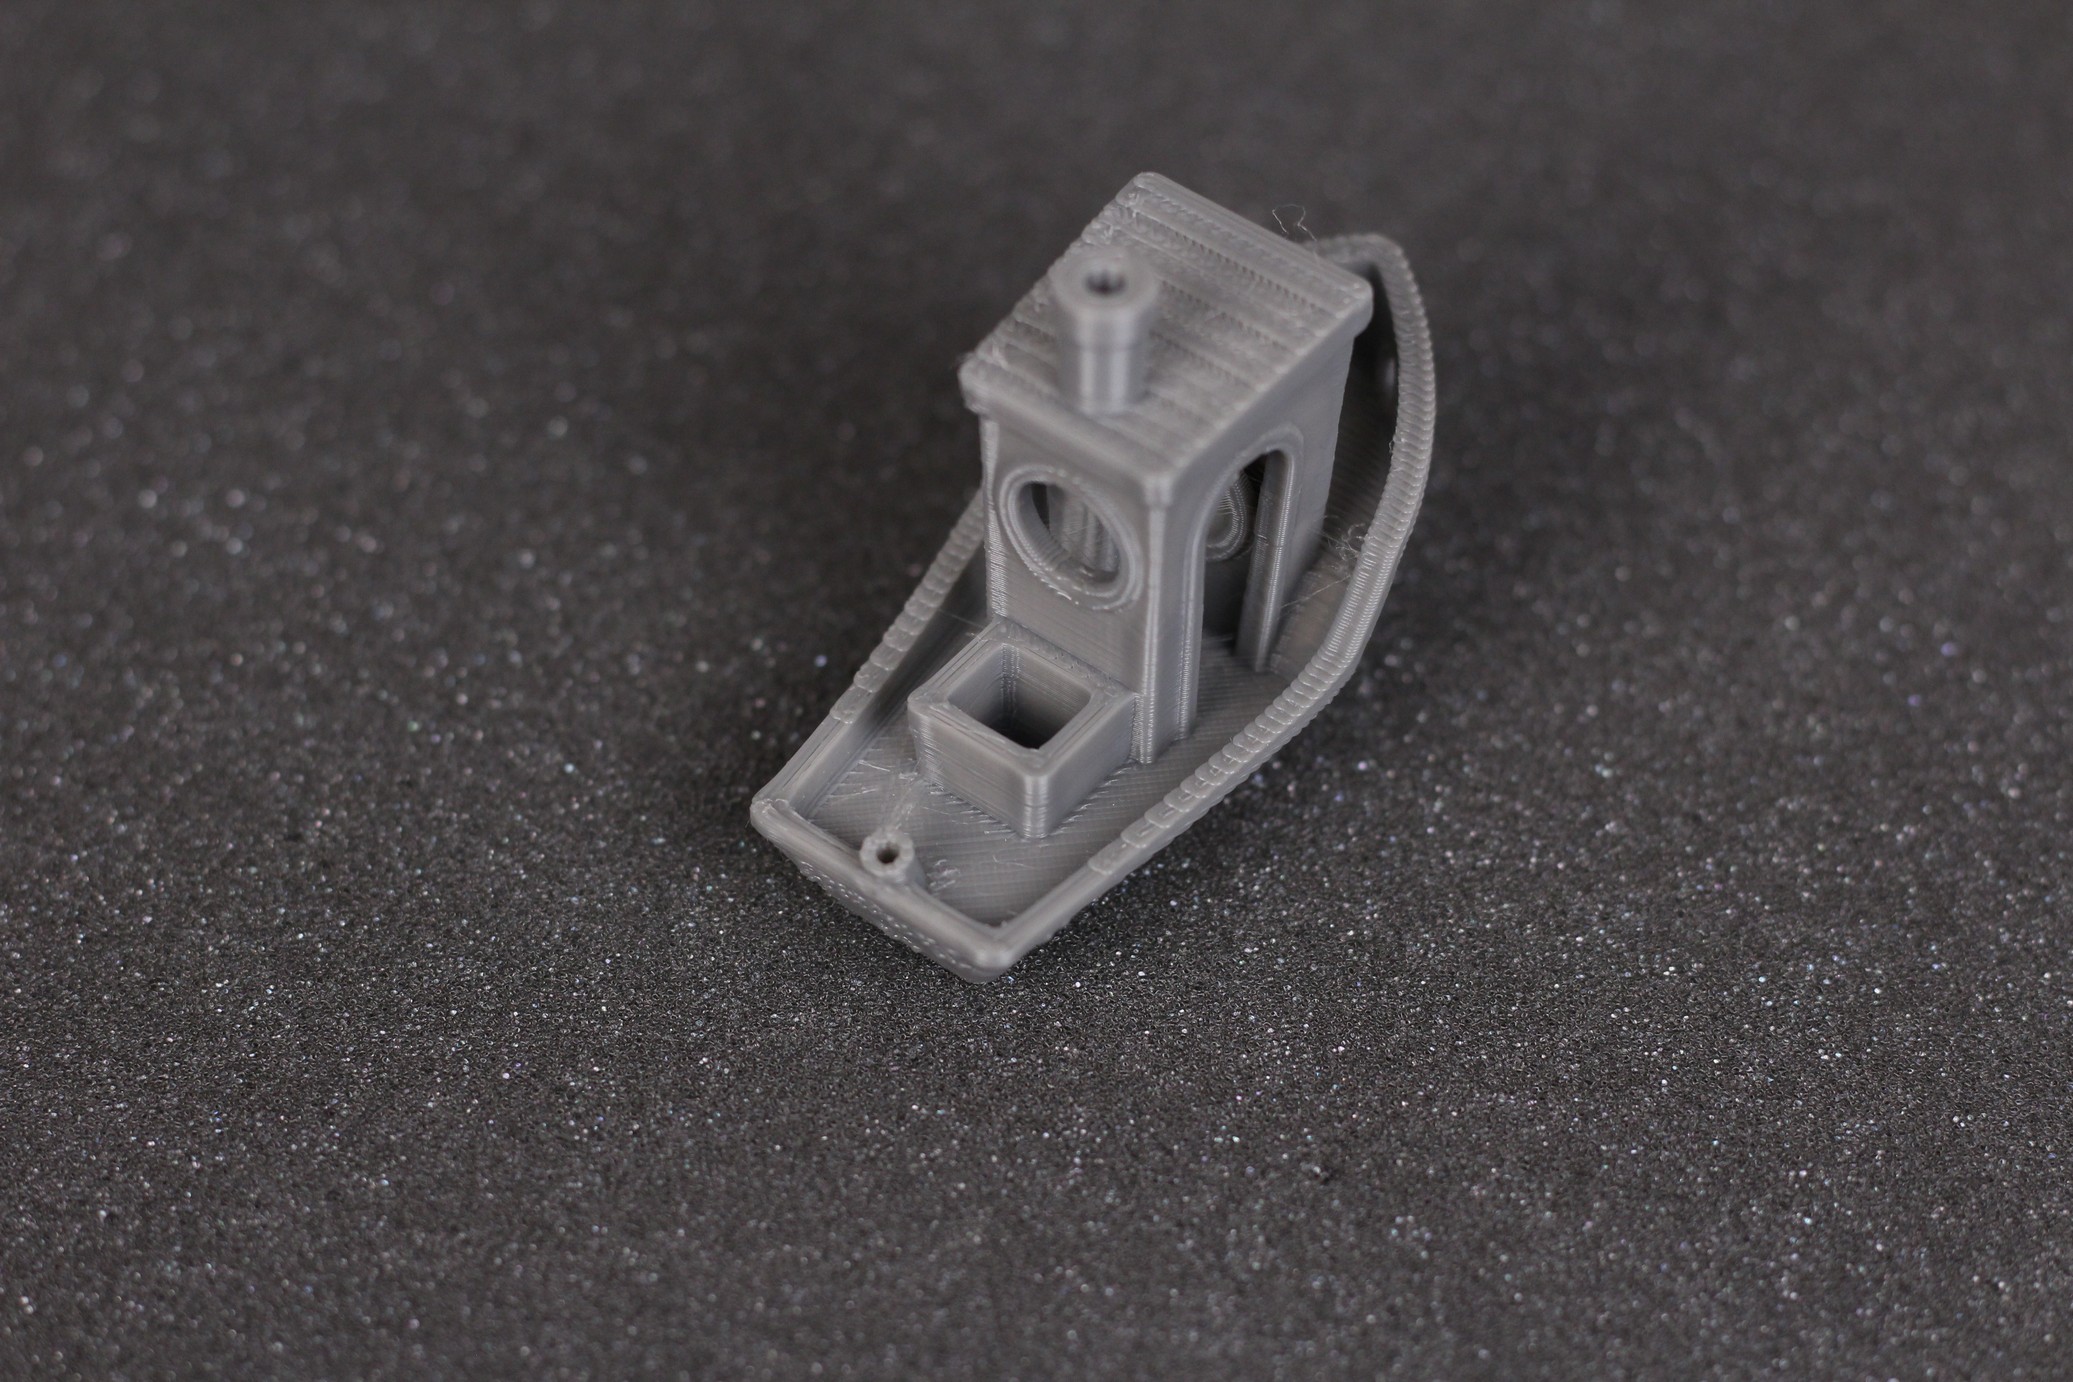 3D Benchy printed on the Ender 3 S1 1 | Creality Ender 3 S1 Review: Almost Perfect